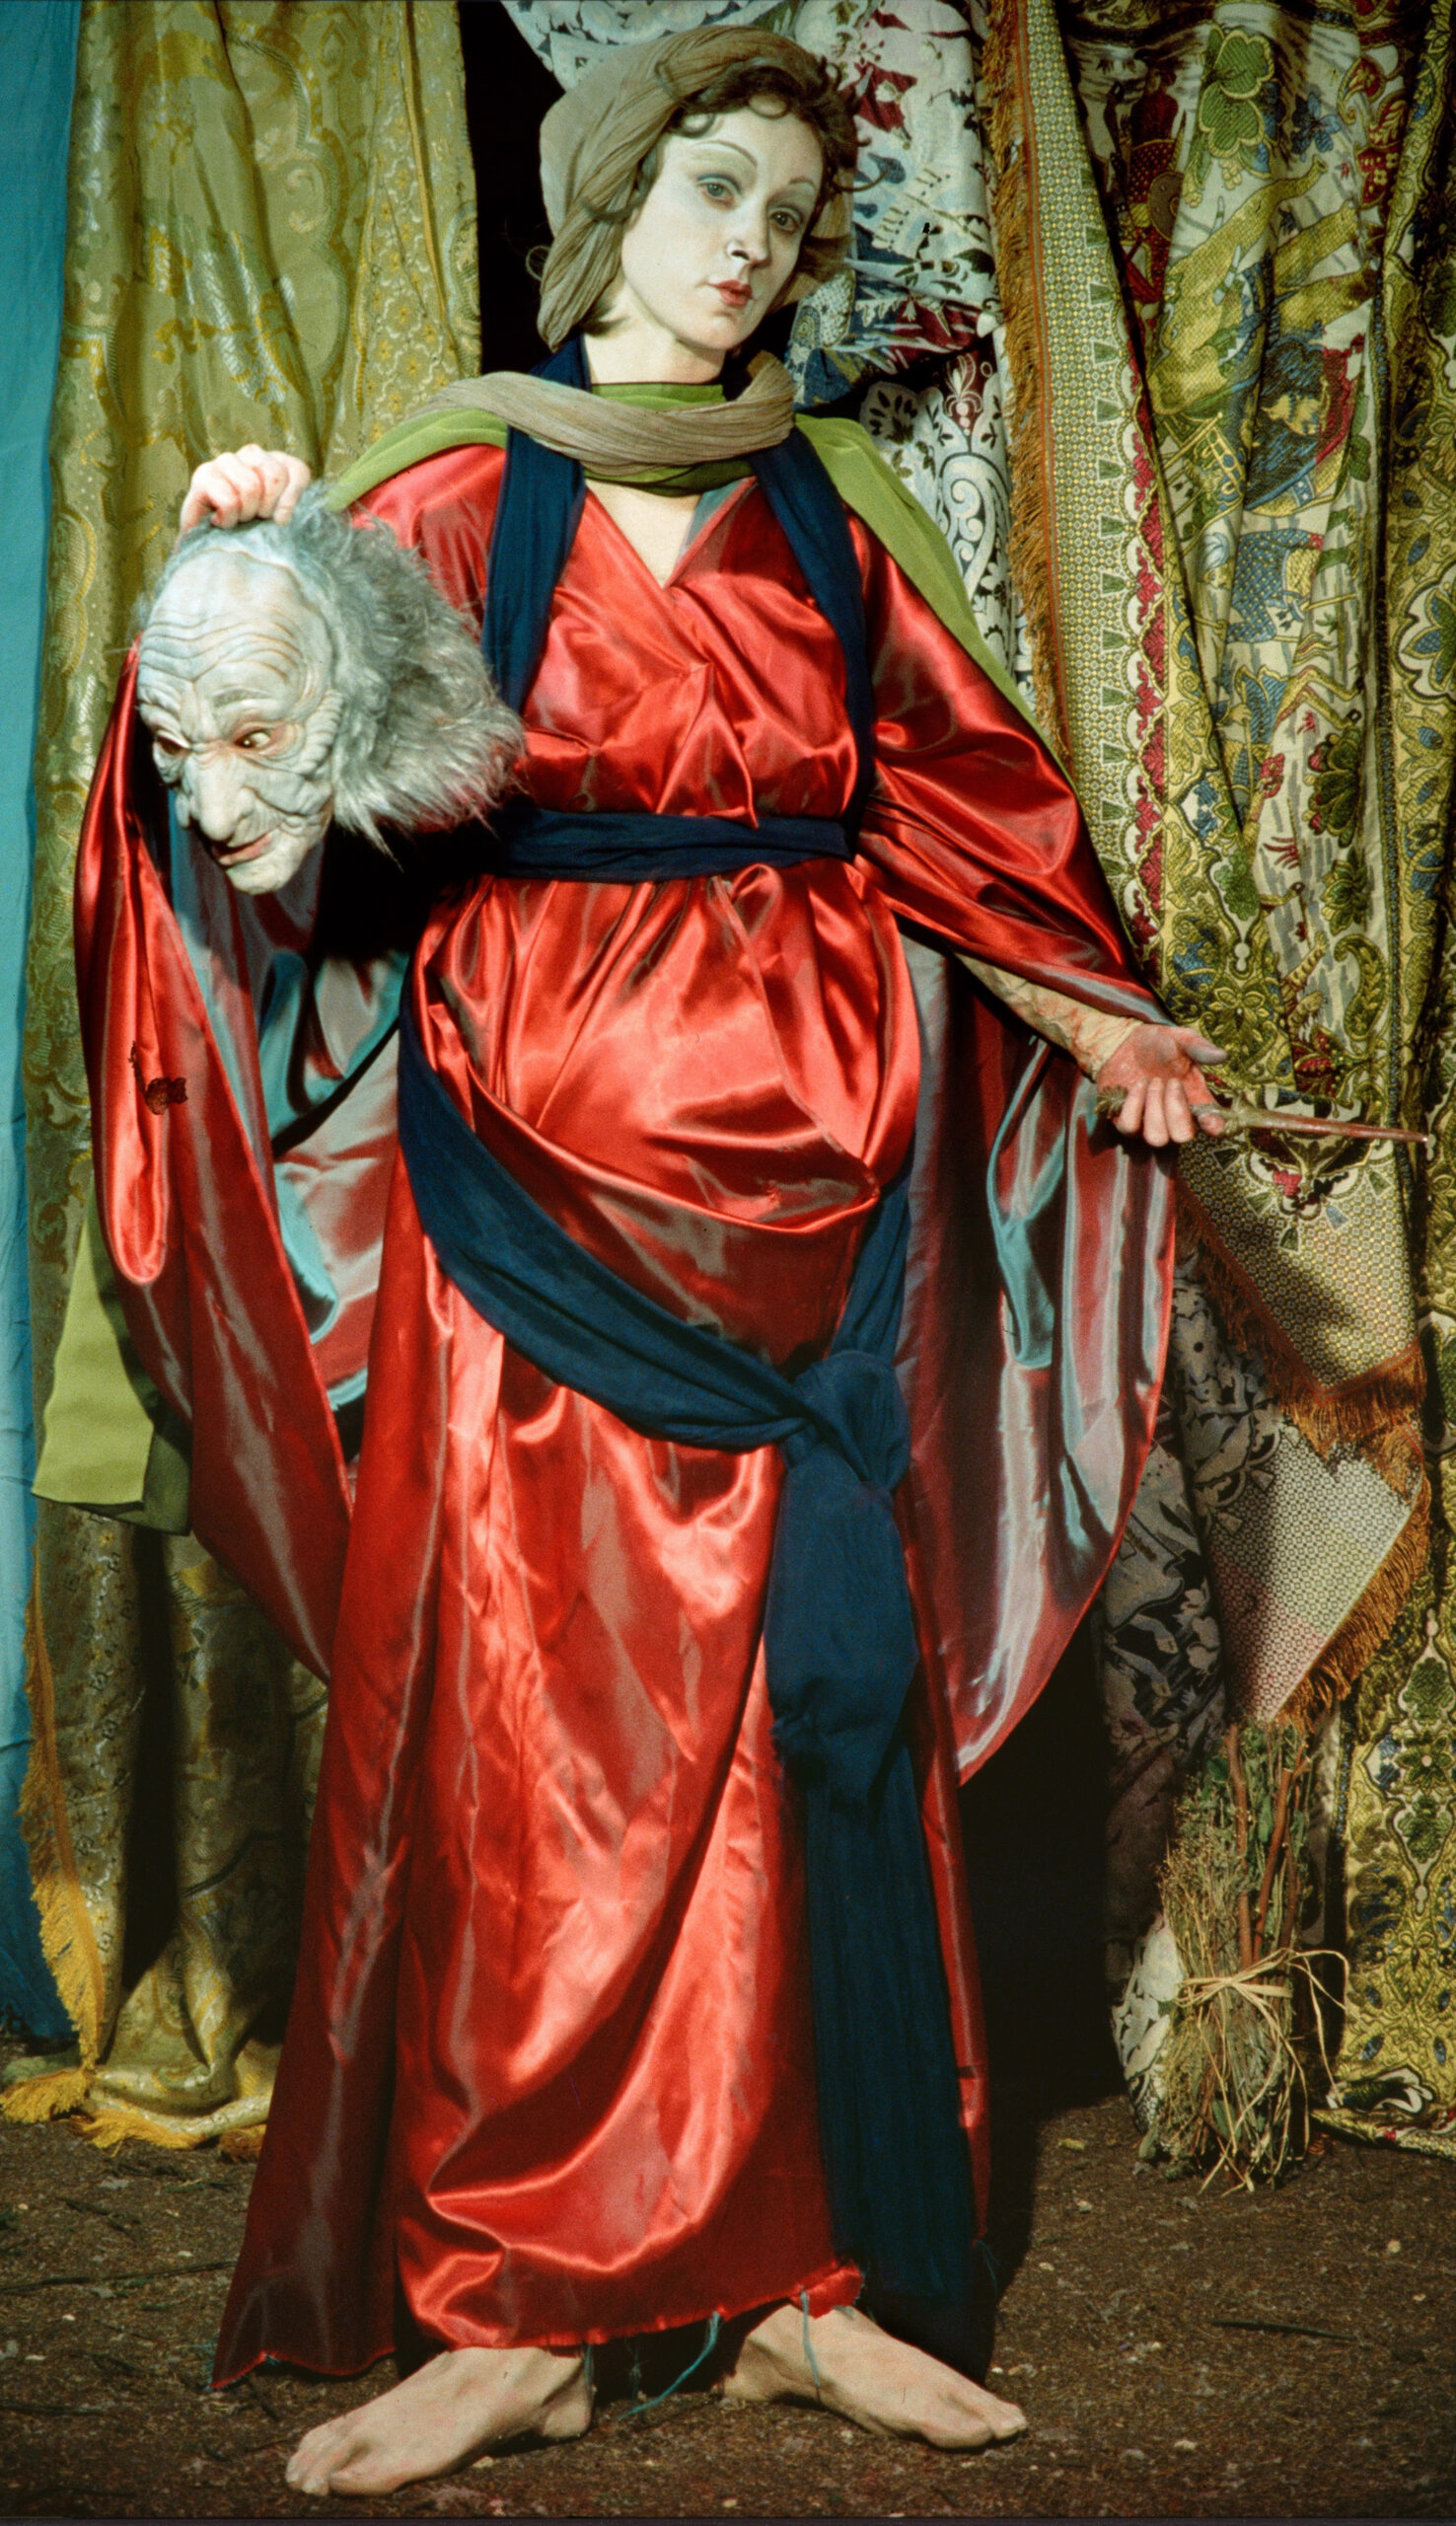 Cindy Sherman, History Portraits / Old Masters, 1988-1990